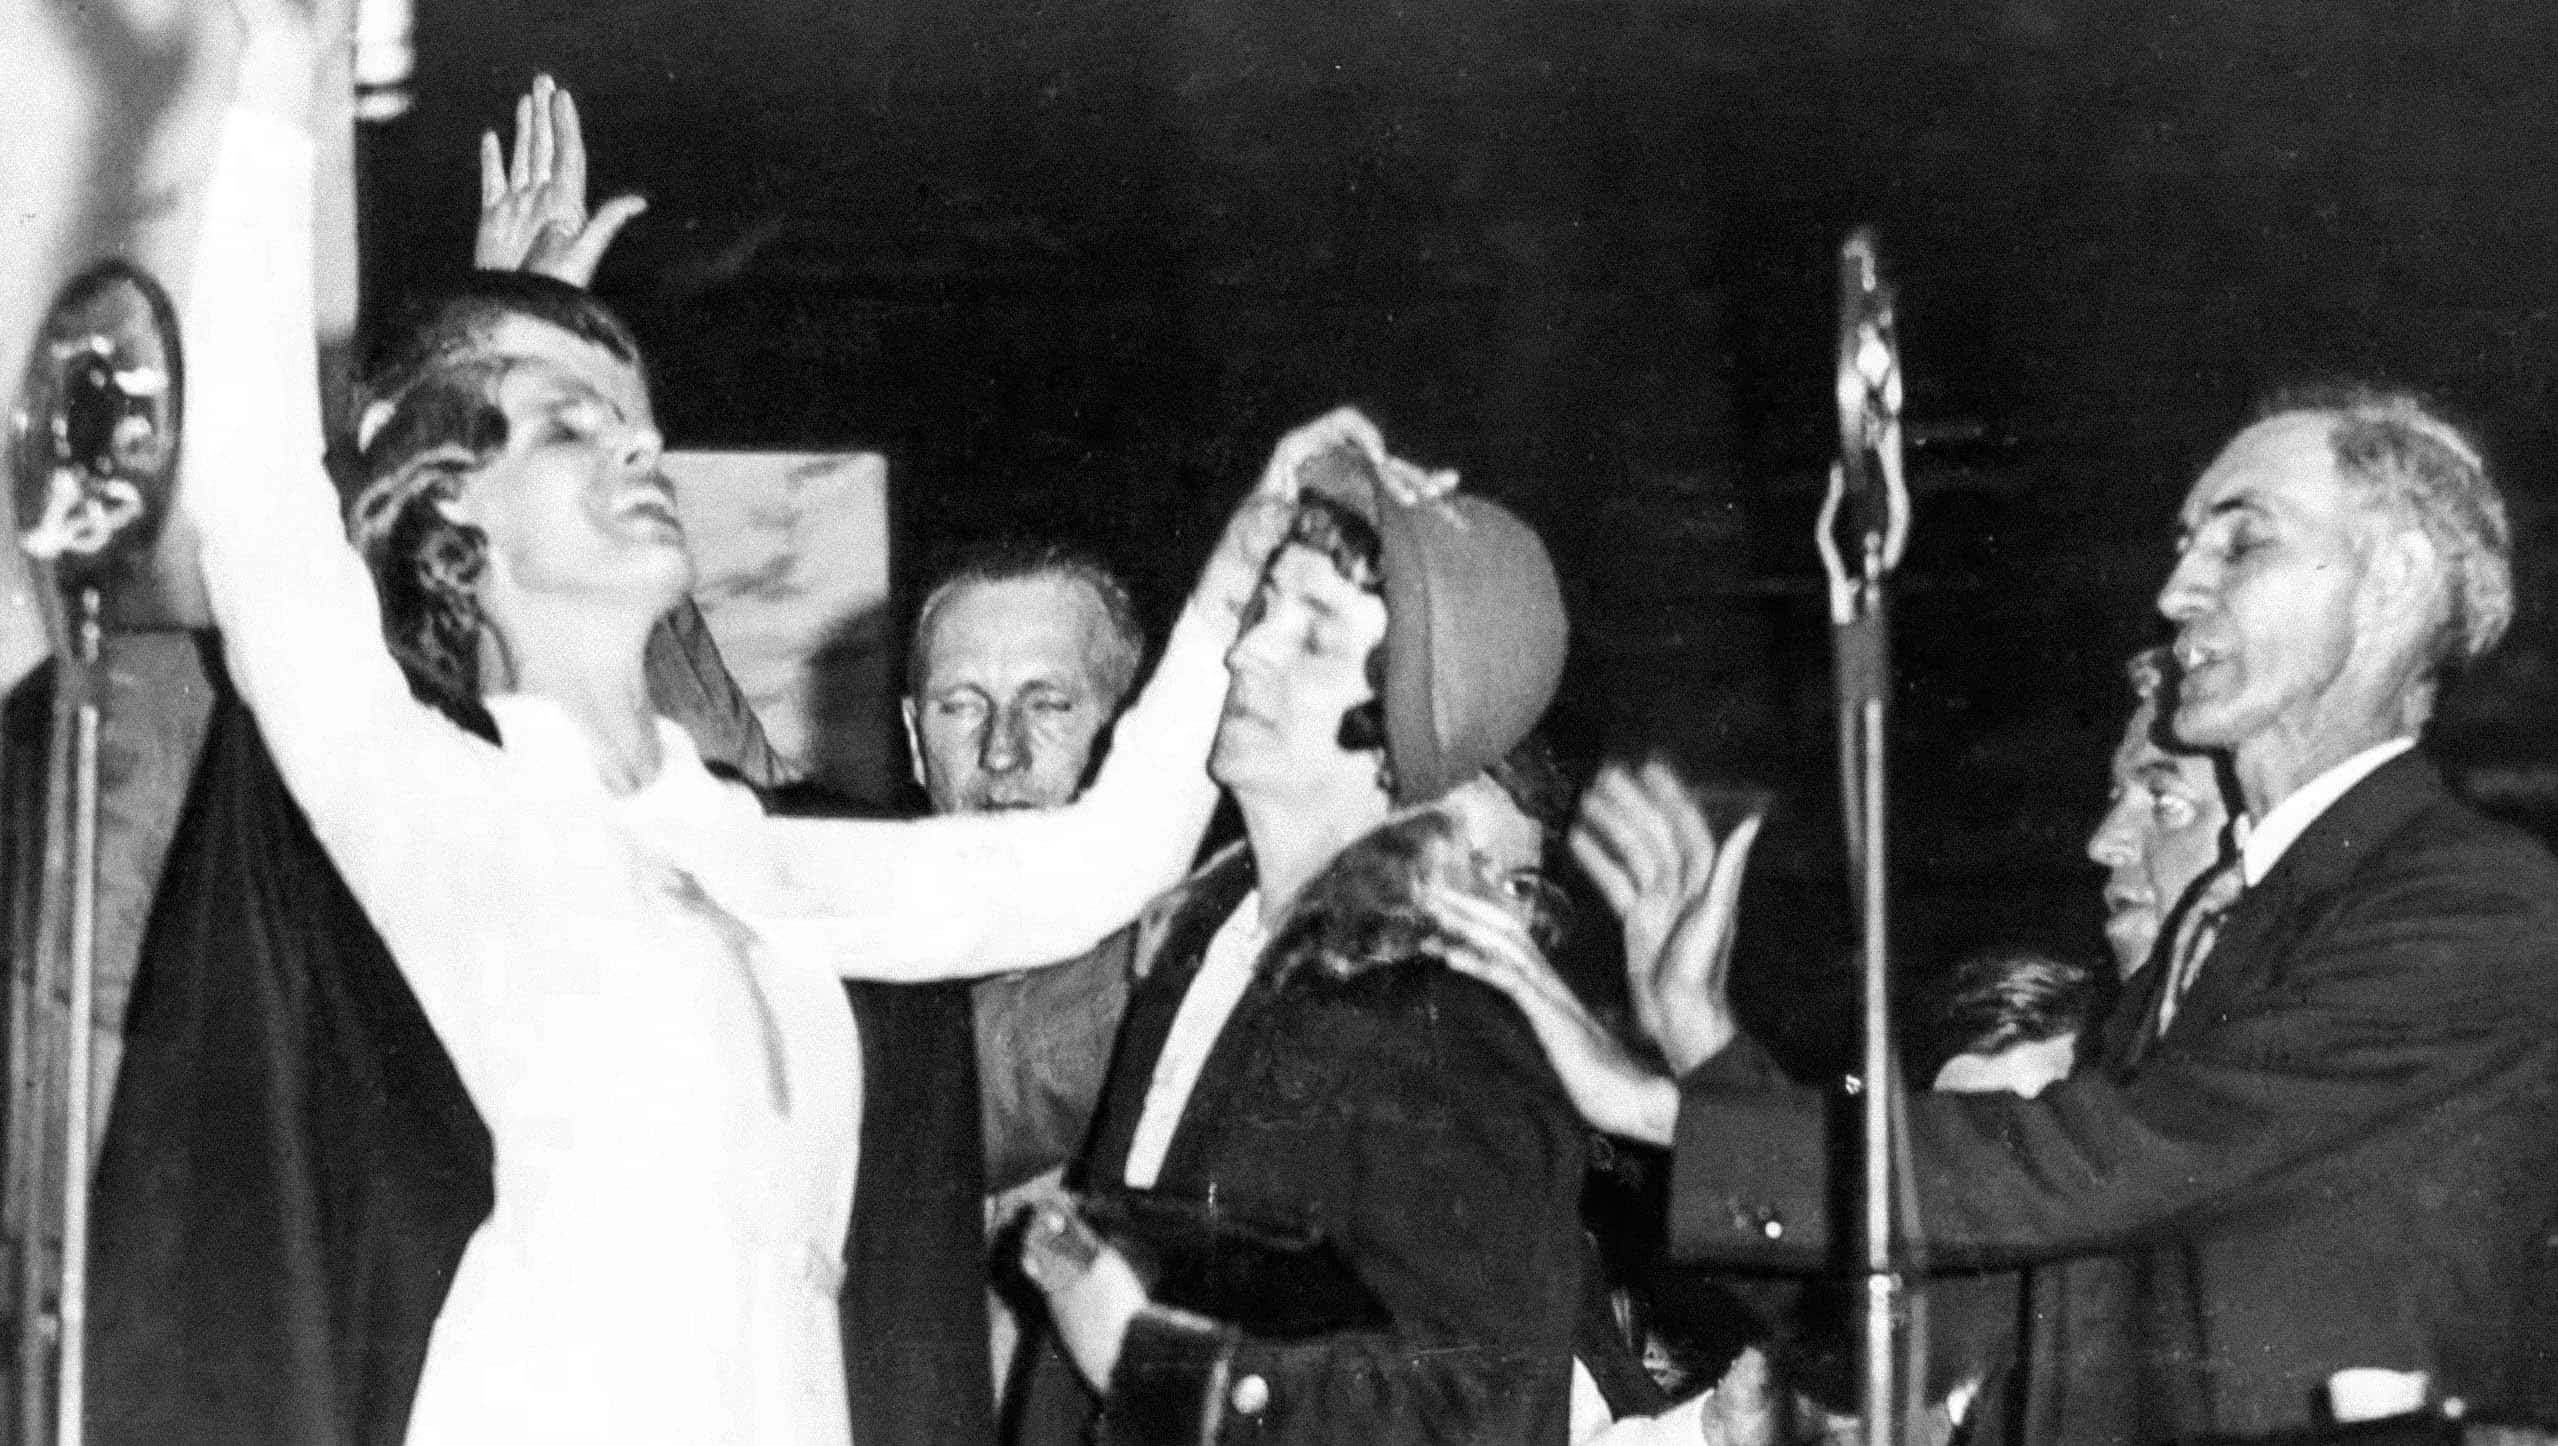 Aimee Semple McPherson Facts